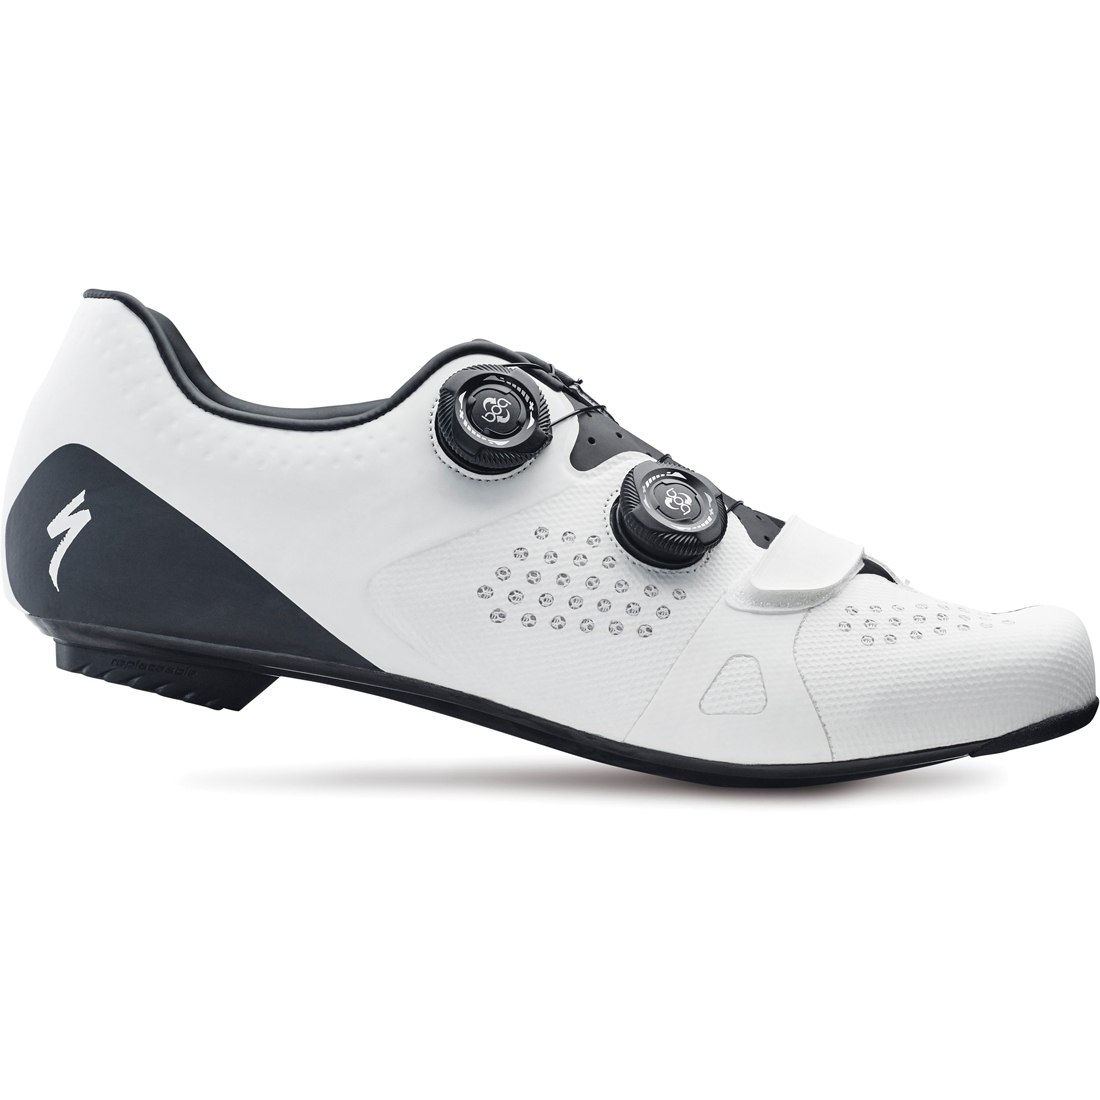 Image of Specialized Torch 3.0 Road Shoes - White